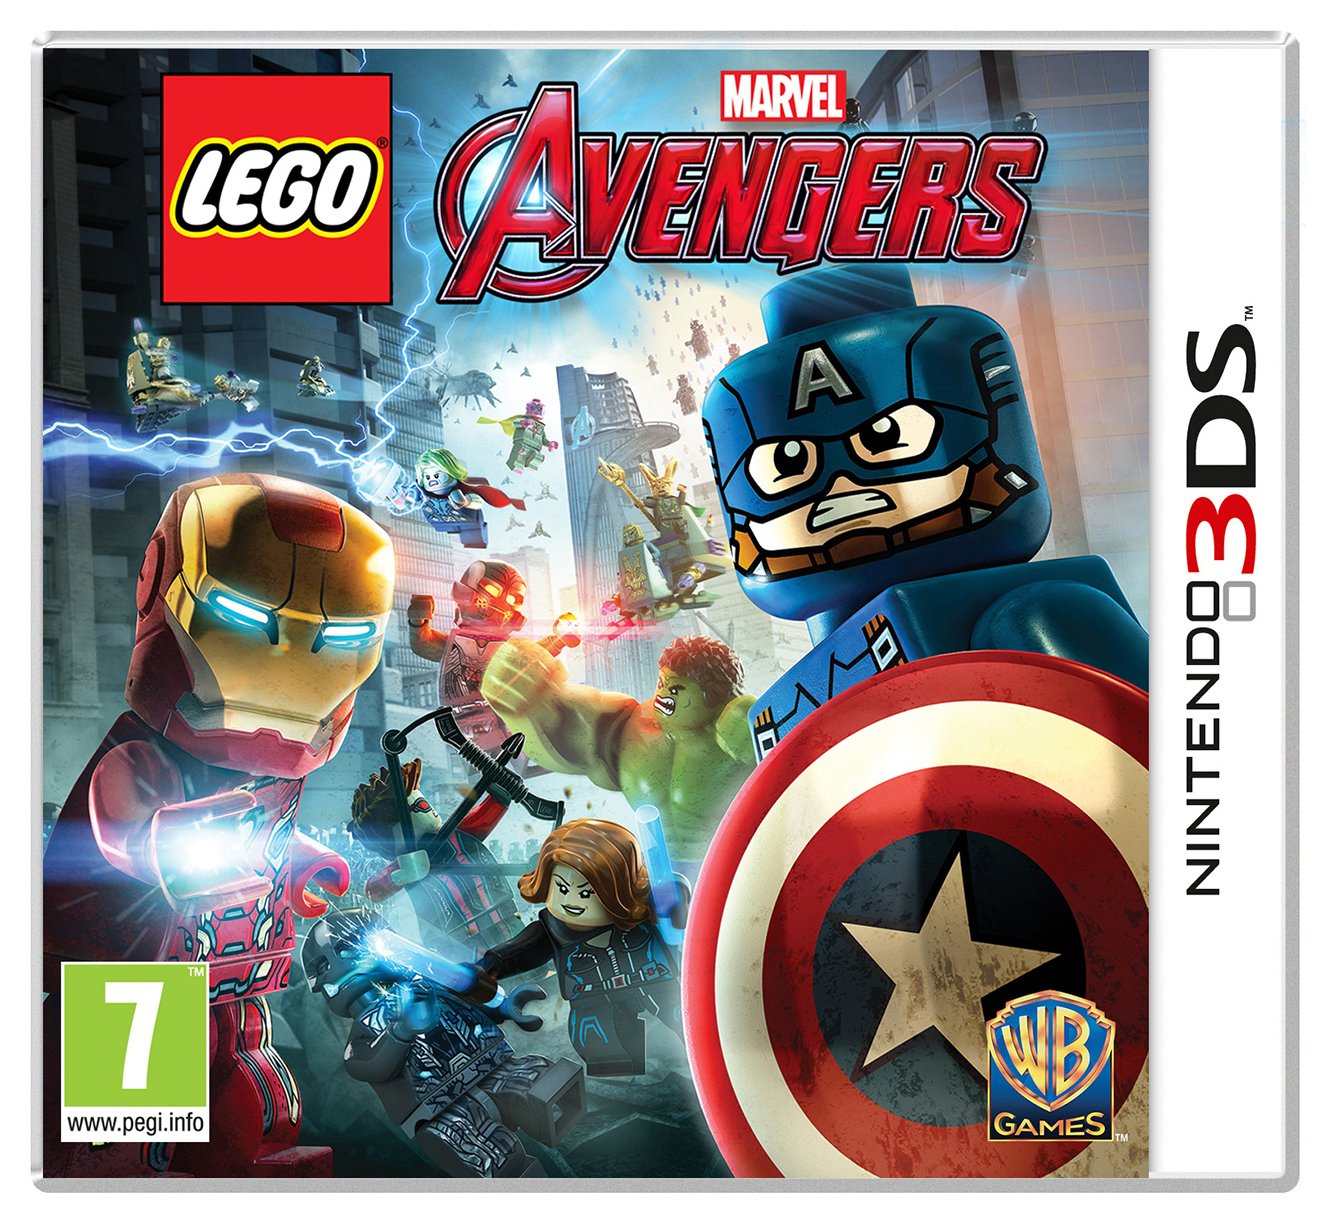 LEGO Avengers Game Review